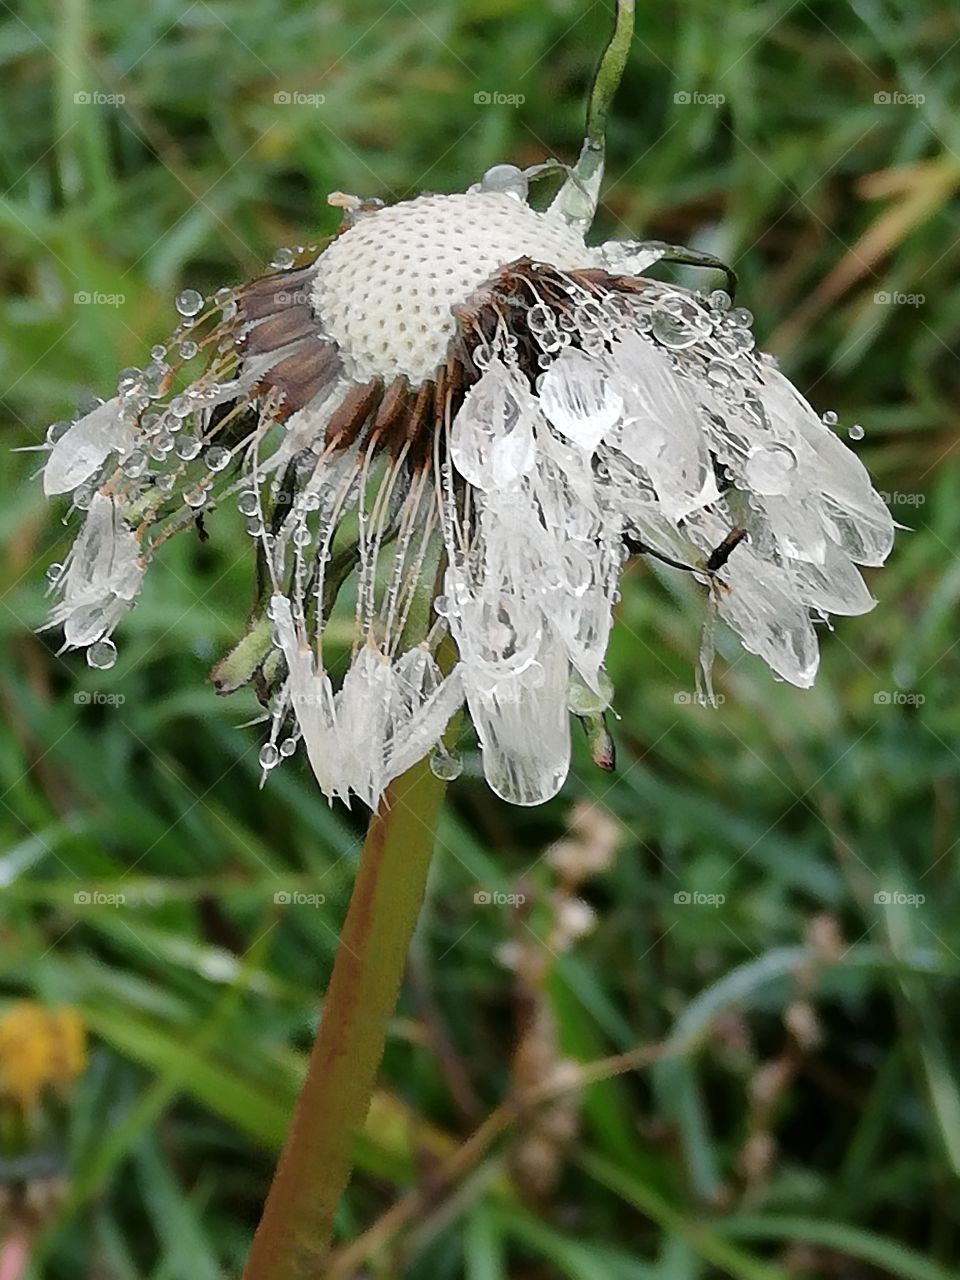 Dandelion blossom covered with raindrops